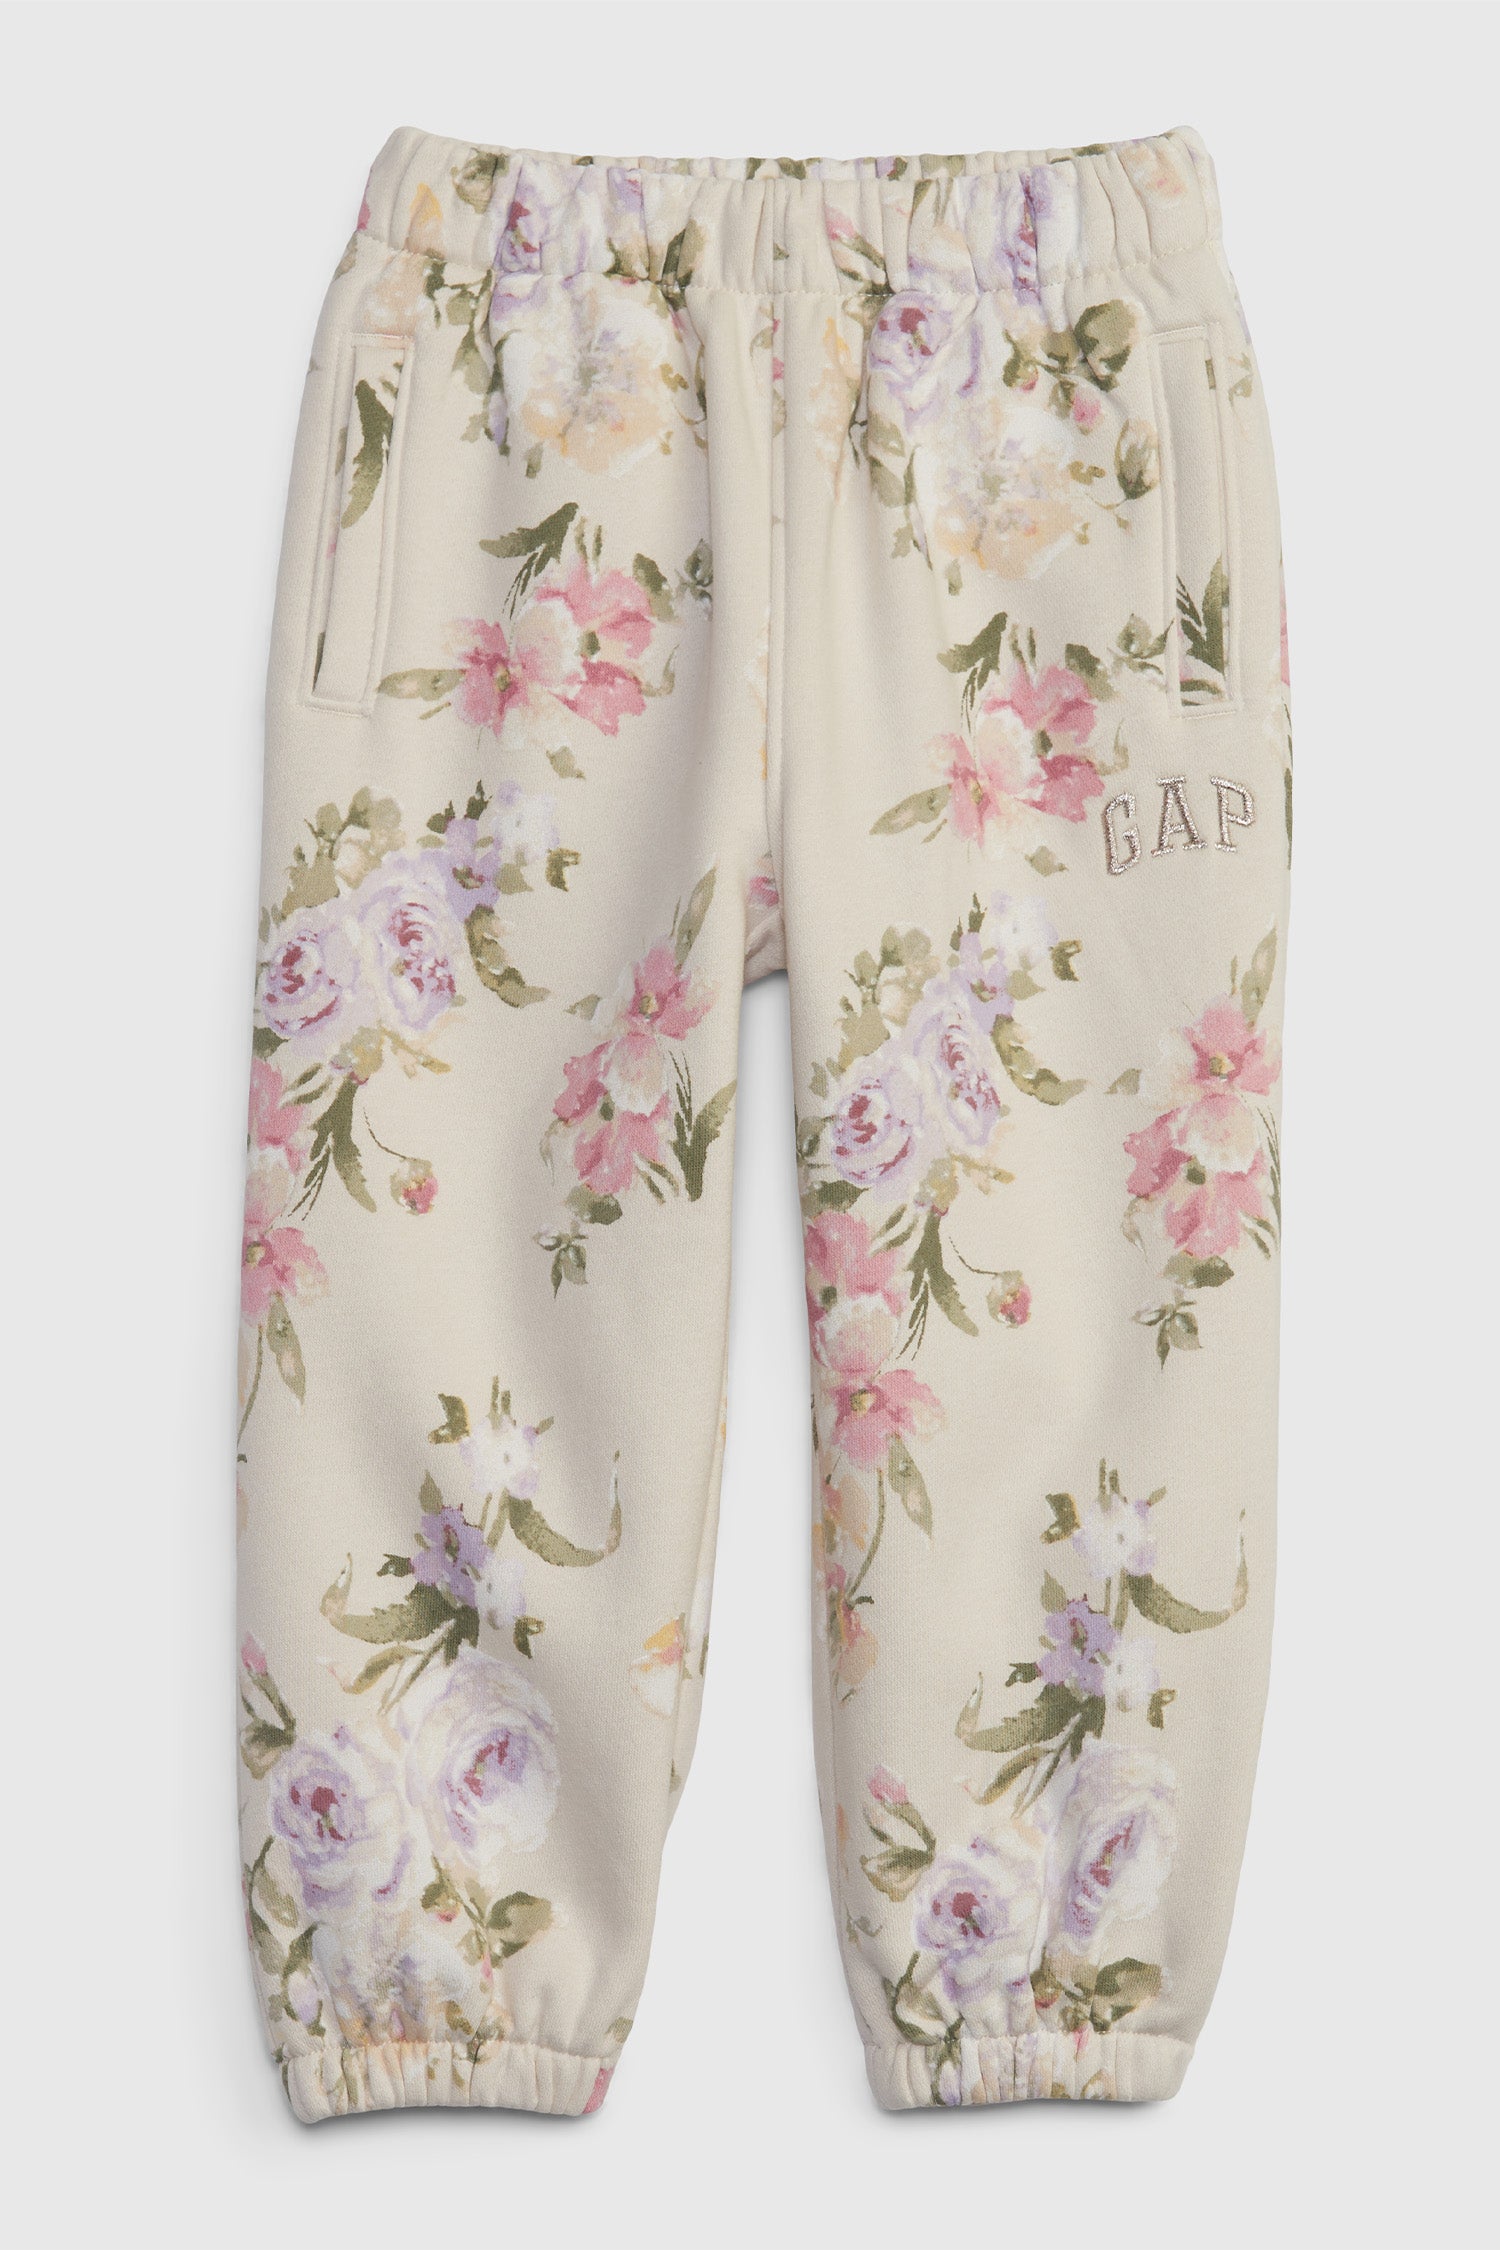 Girl's toddler cream floral joggers with GAP logo on leg and front pockets